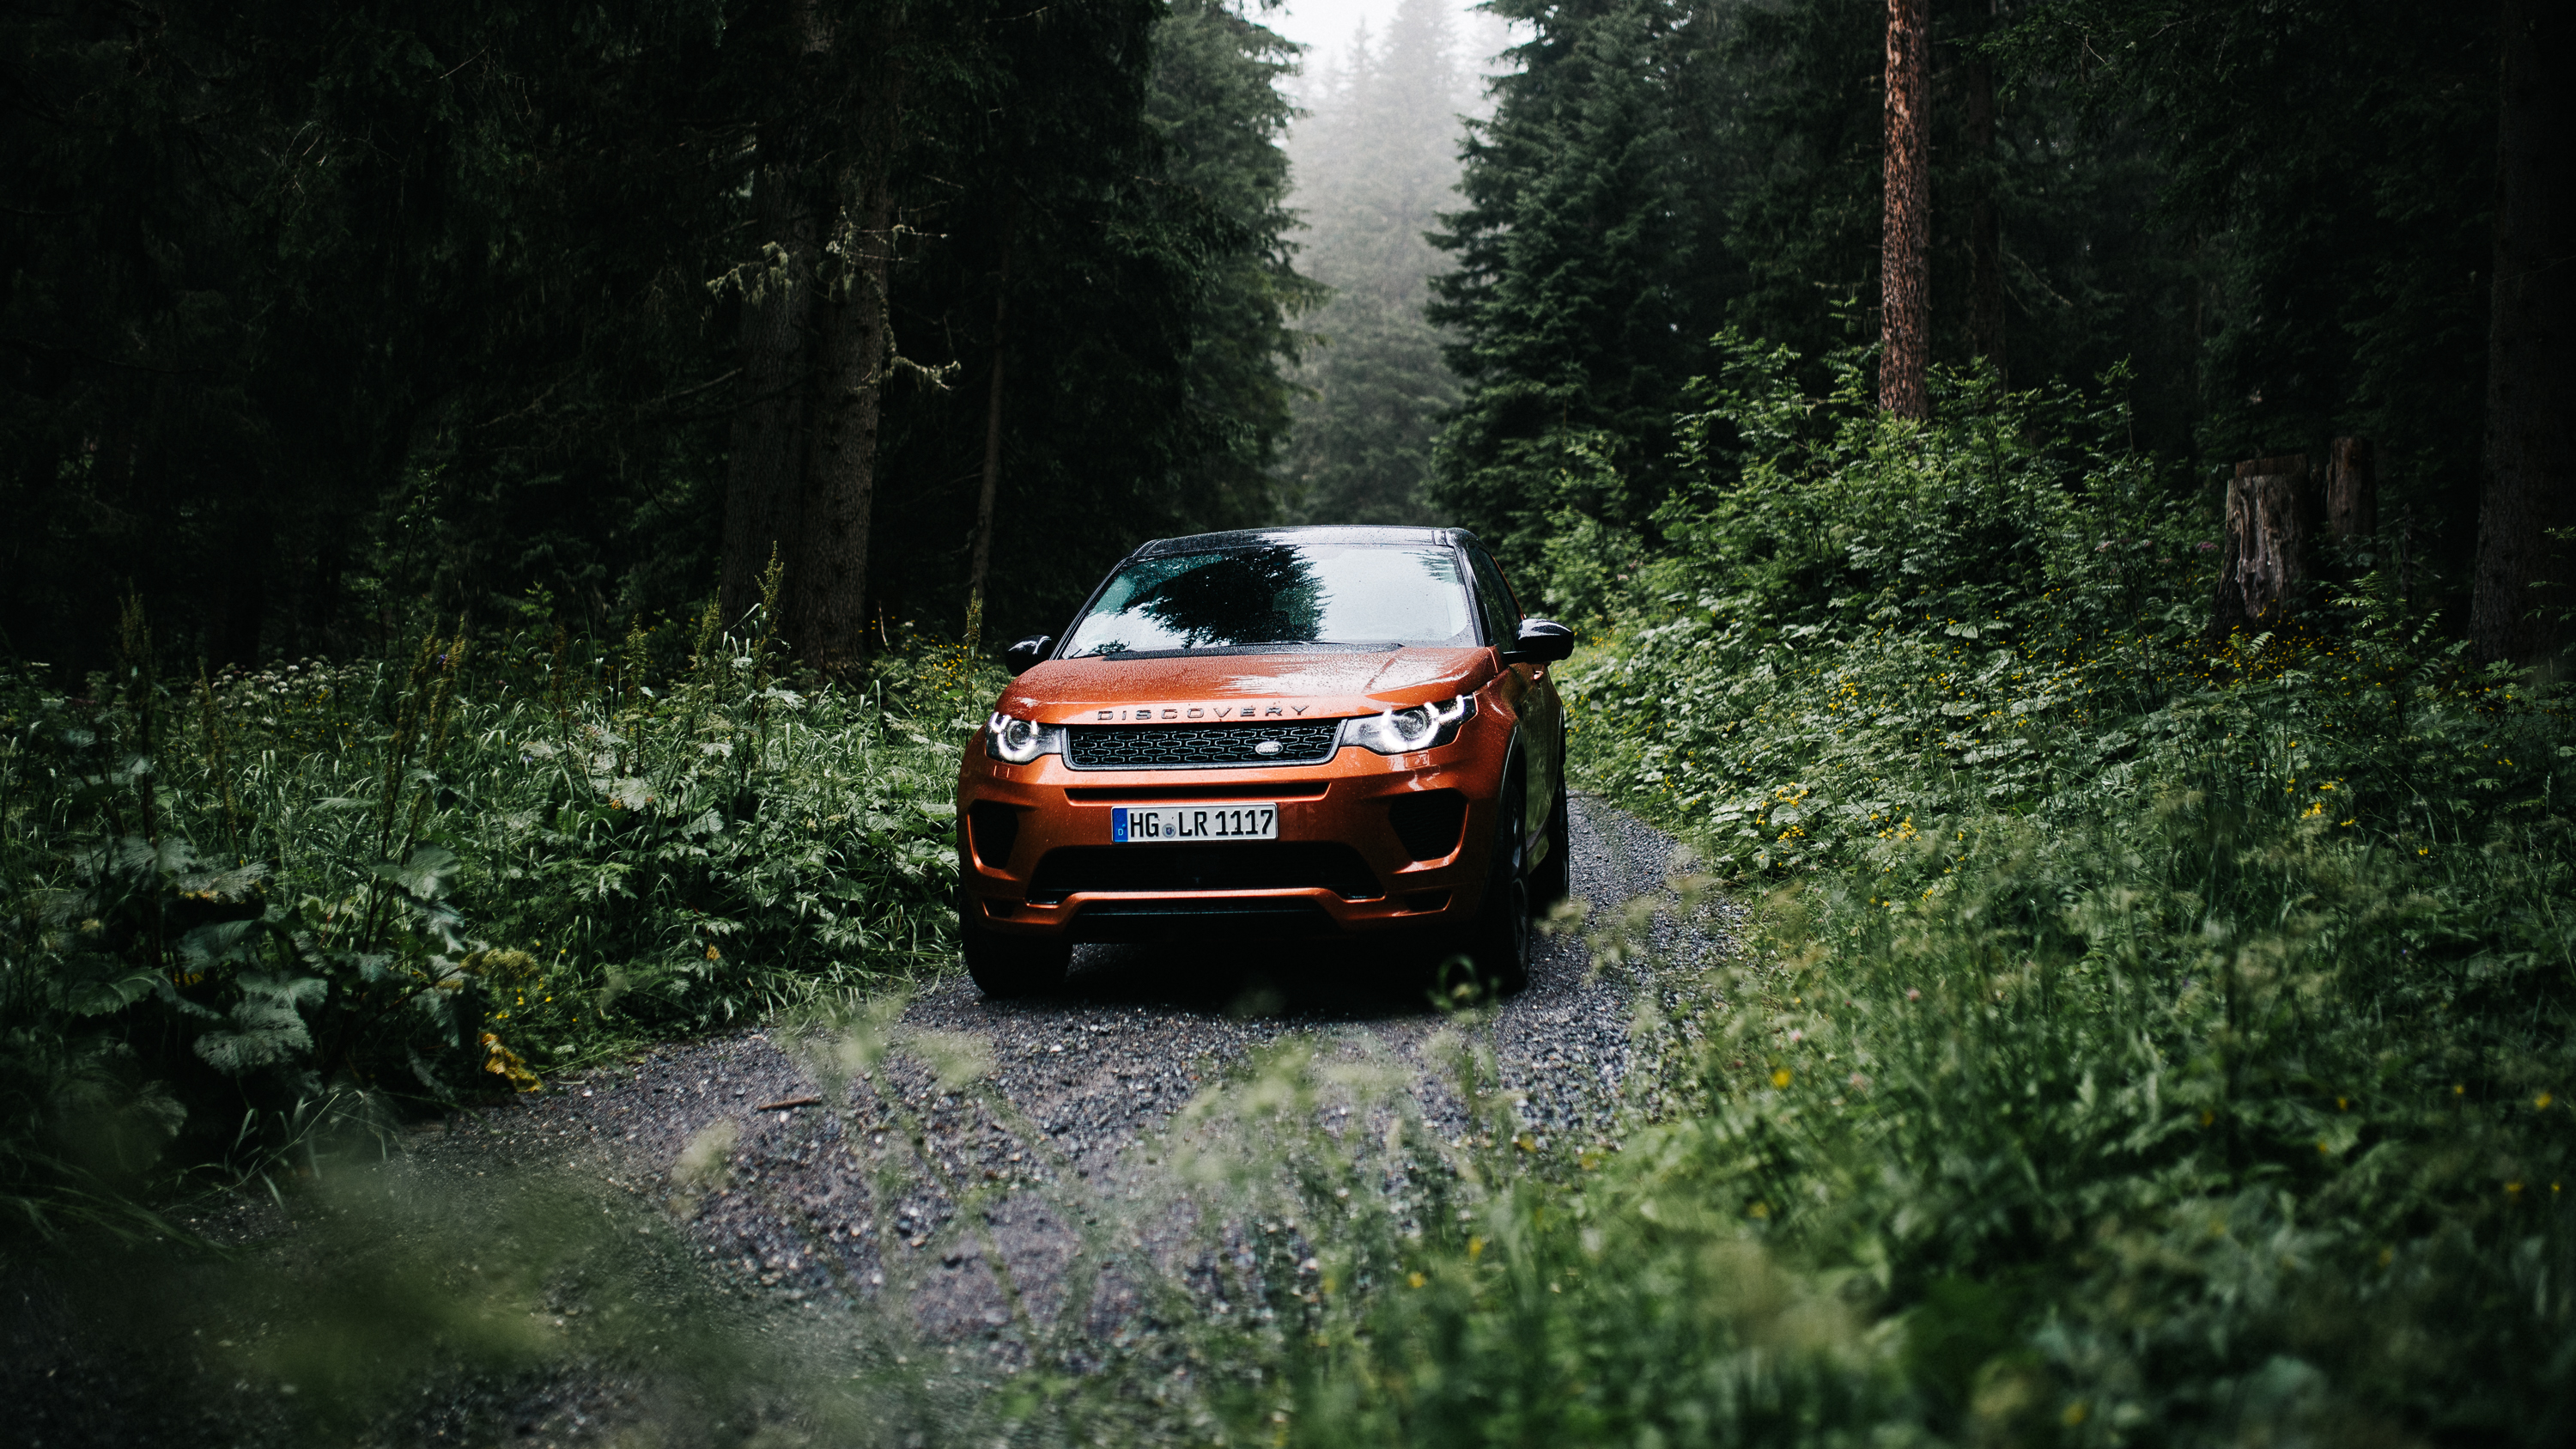 General 3000x1687 vehicle Land Rover car landscape forest tree bark road trees Land Rover Discovery